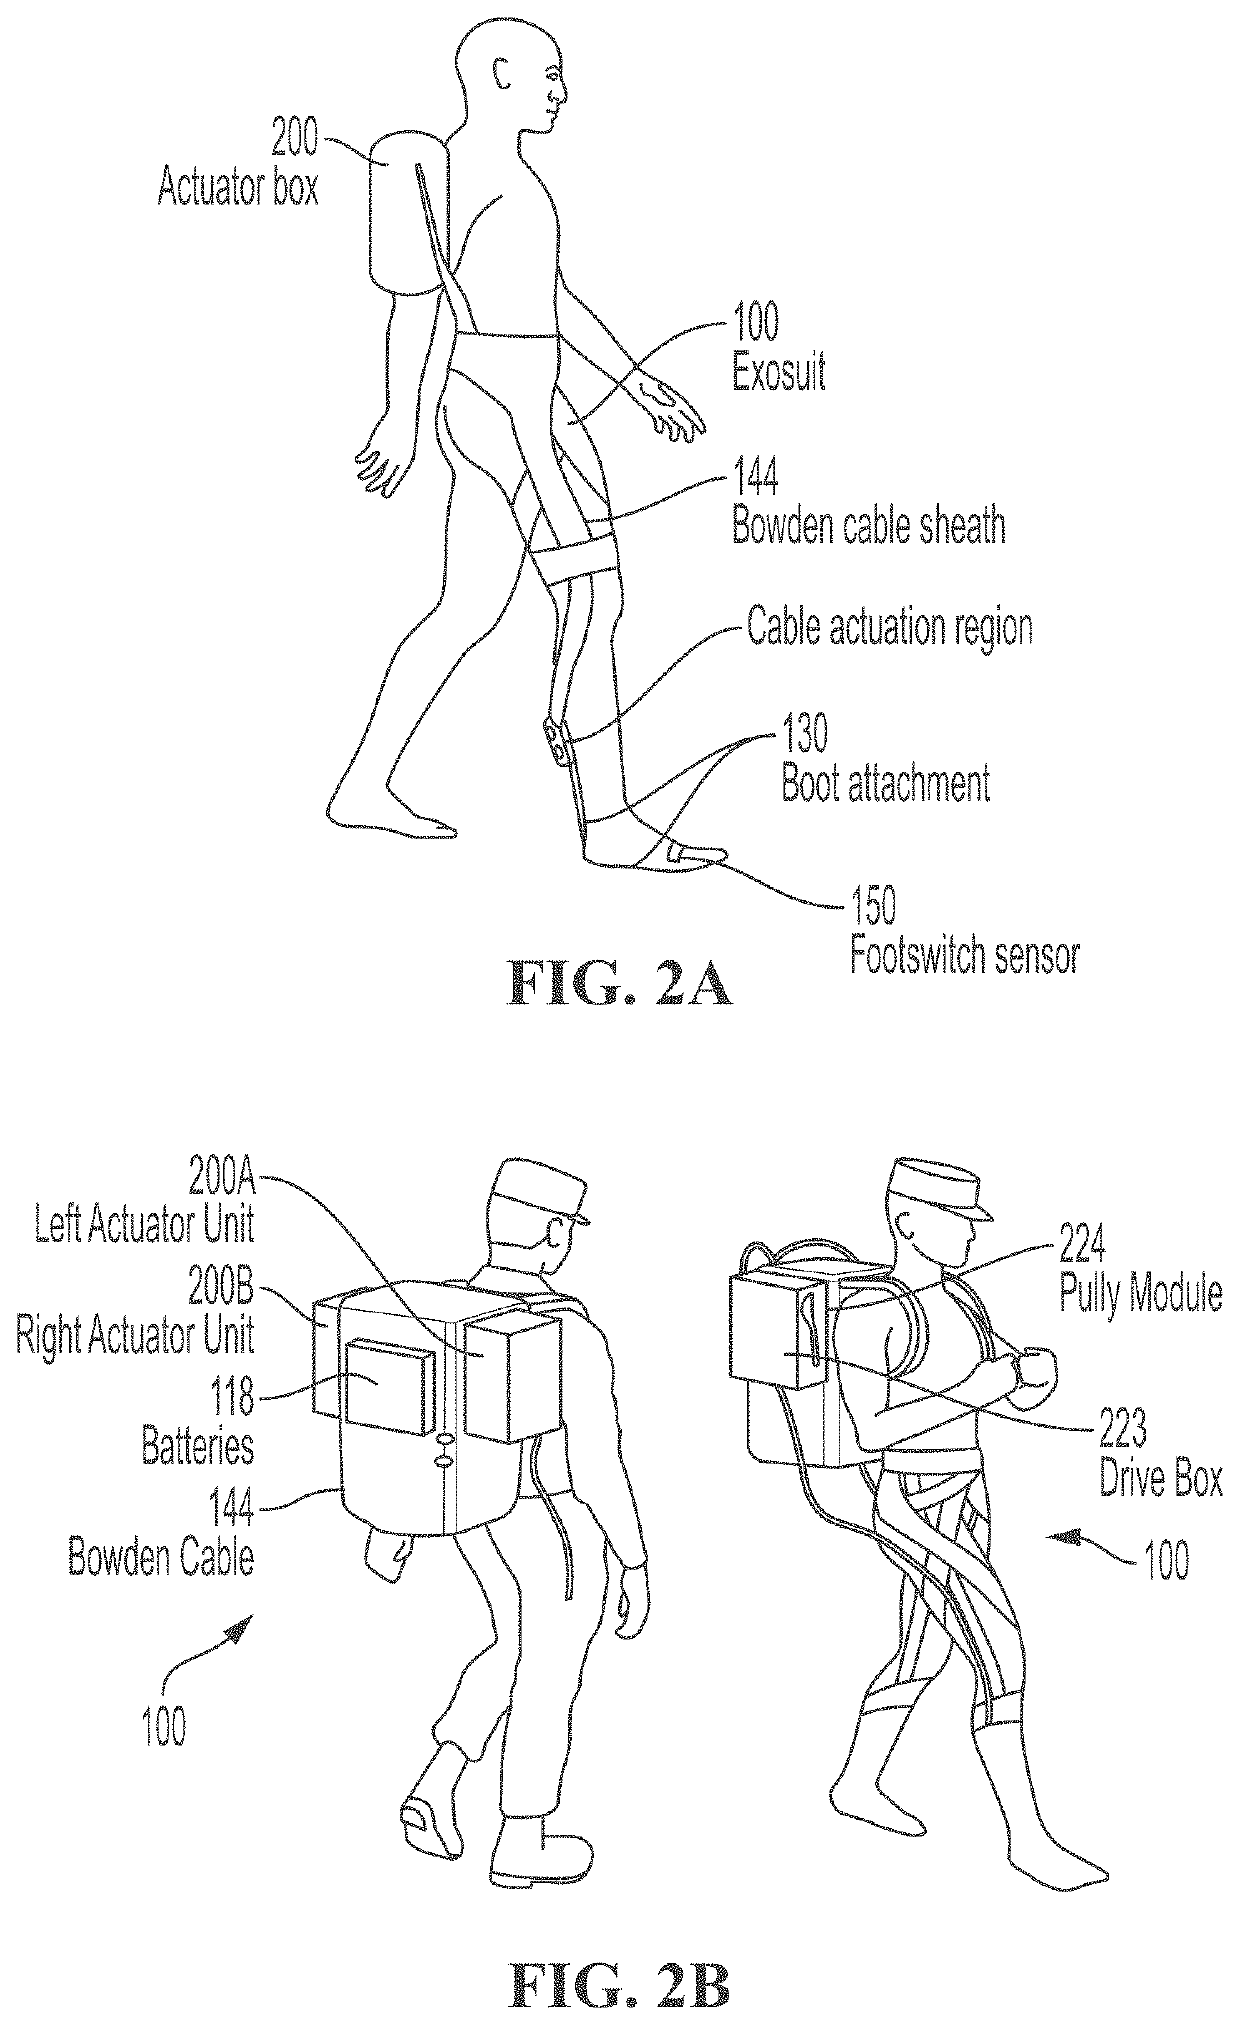 Soft exosuit for assistance with human motion